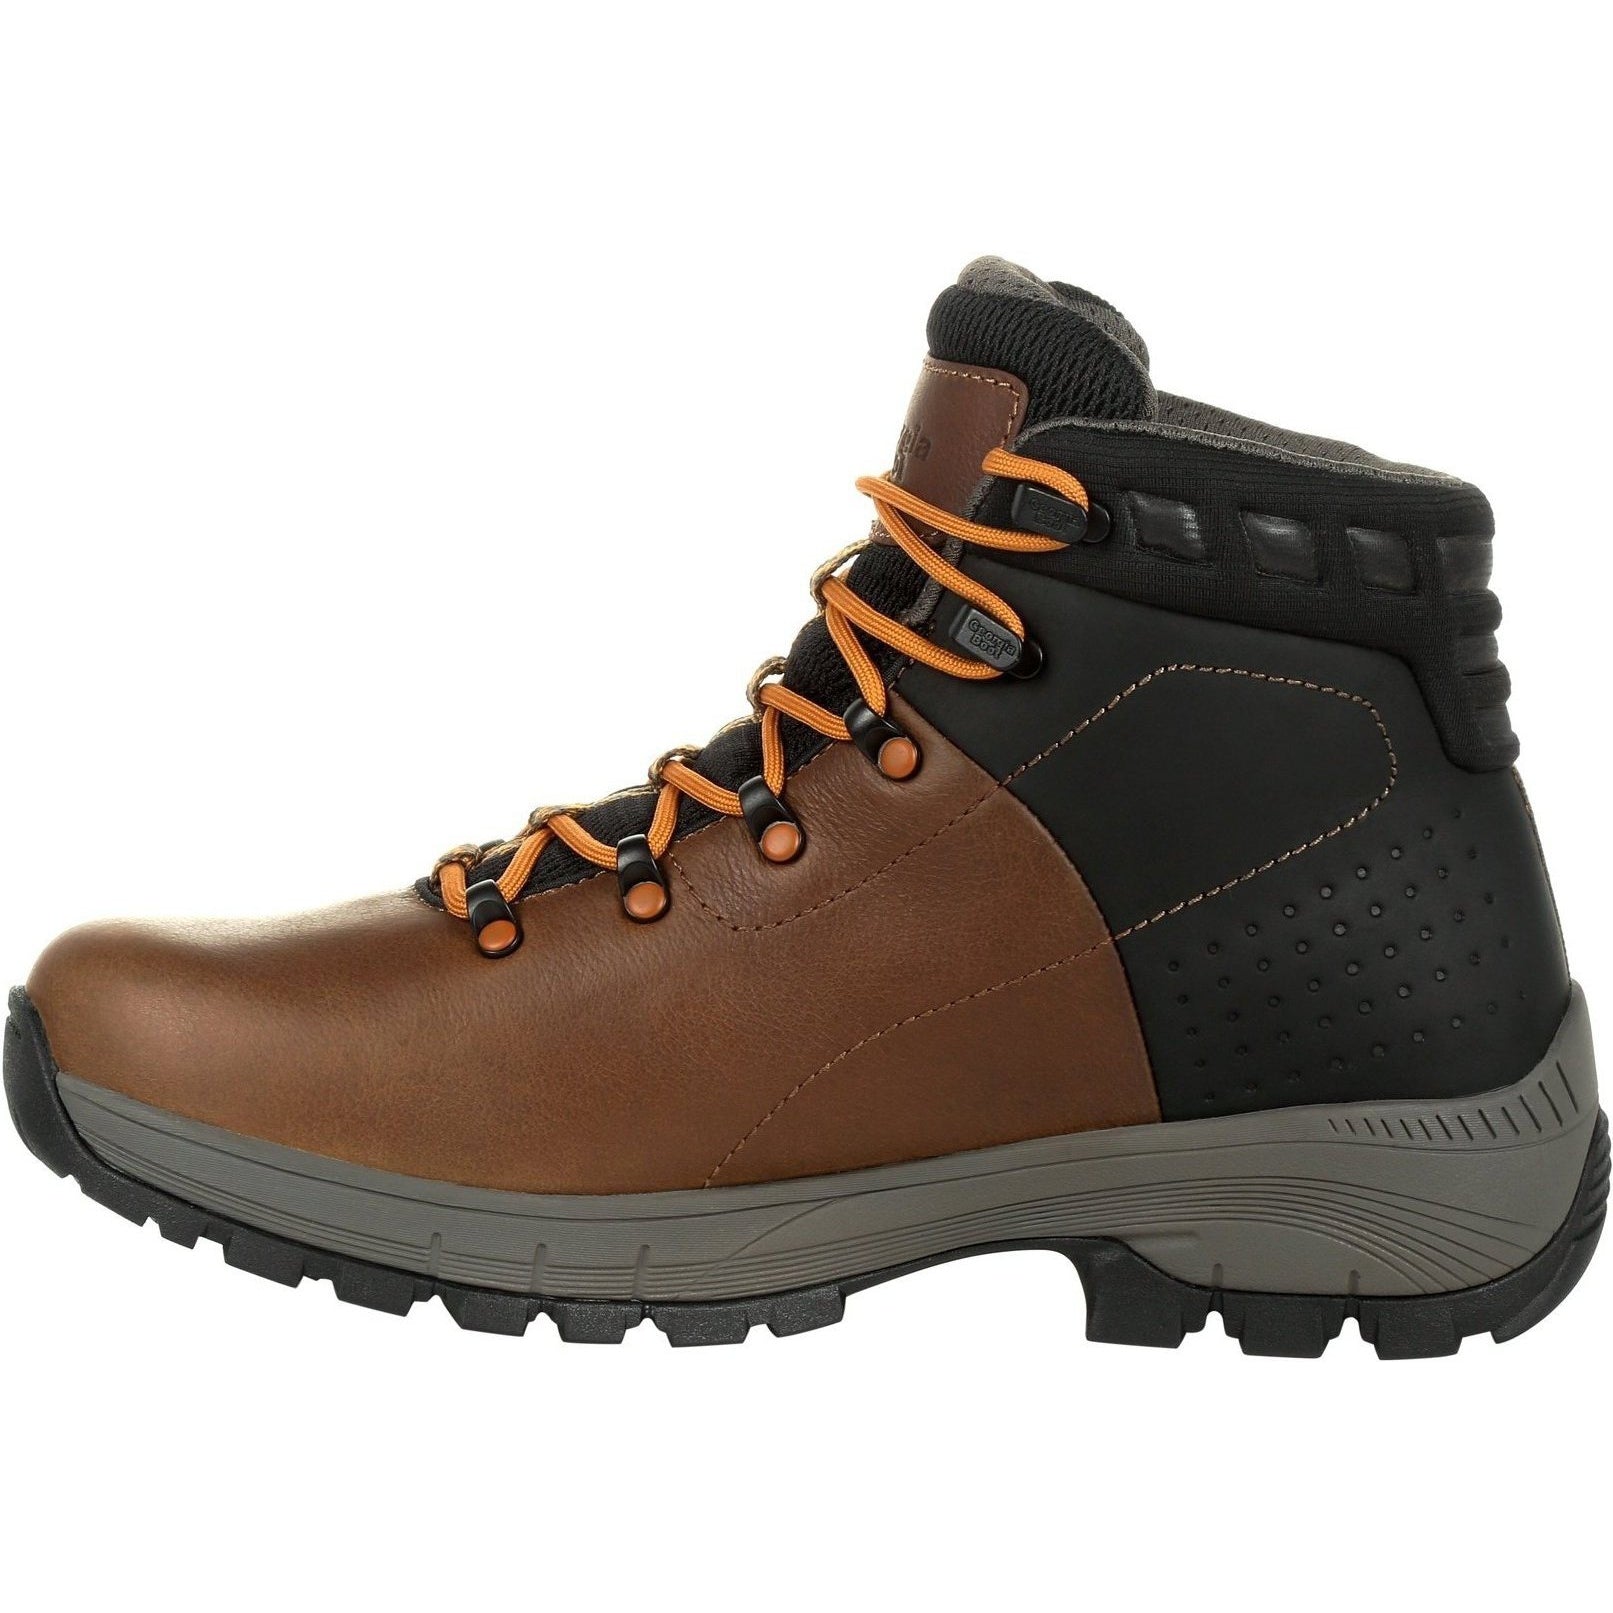 Georgia Men's Eagle Trail 6" Soft toe WP Hiker Work Boot - Brown - GB00402  - Overlook Boots